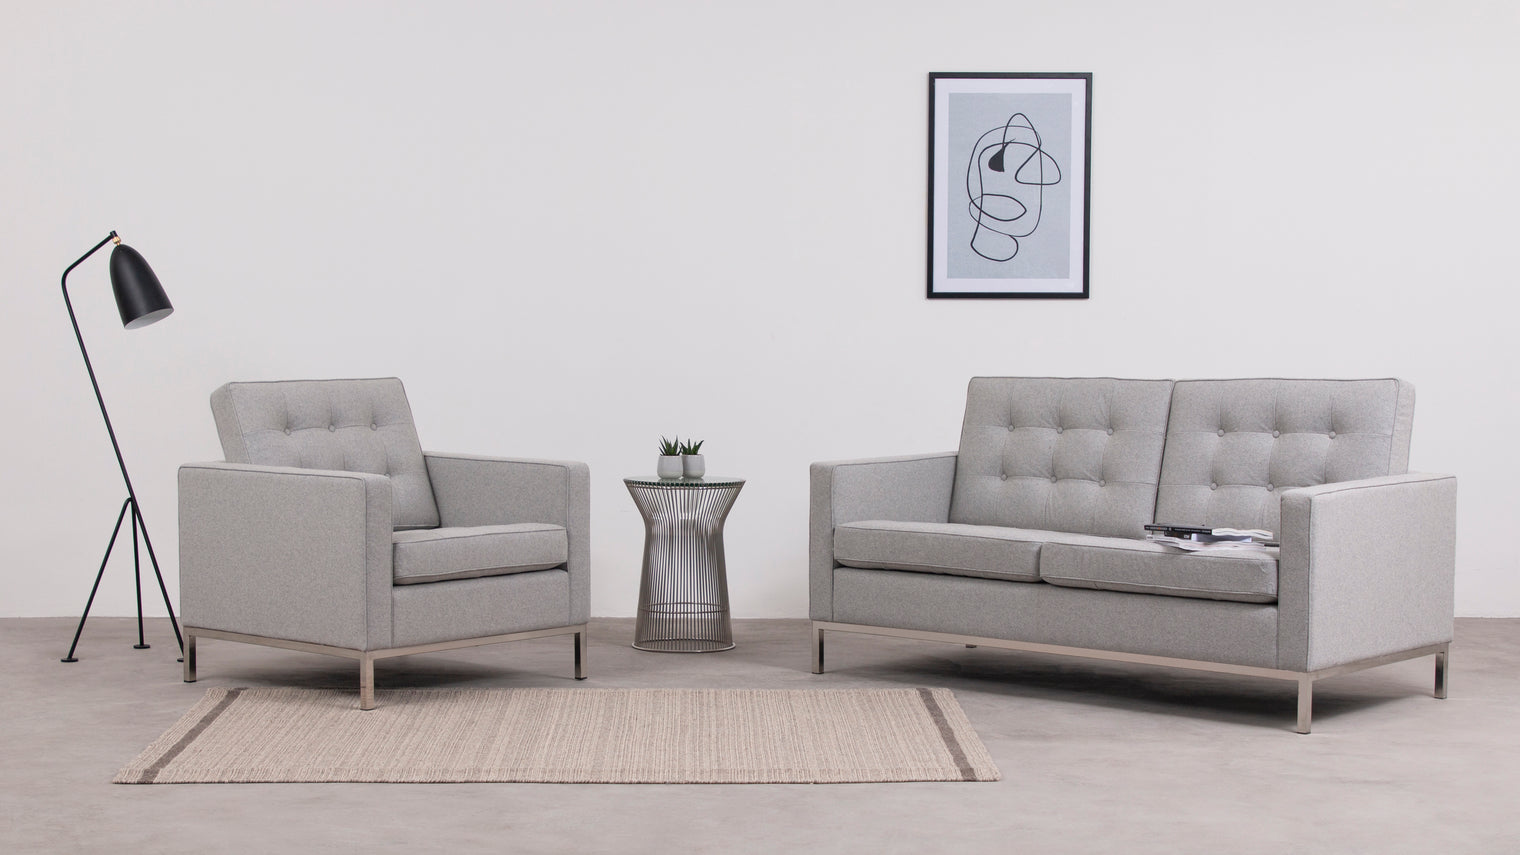 Style, meet comfort|Who says comfort and style can’t coexist beautifully? This Florence Two-Seater Sofa offers both in a retro shape that has all the modern bells and whistles.
